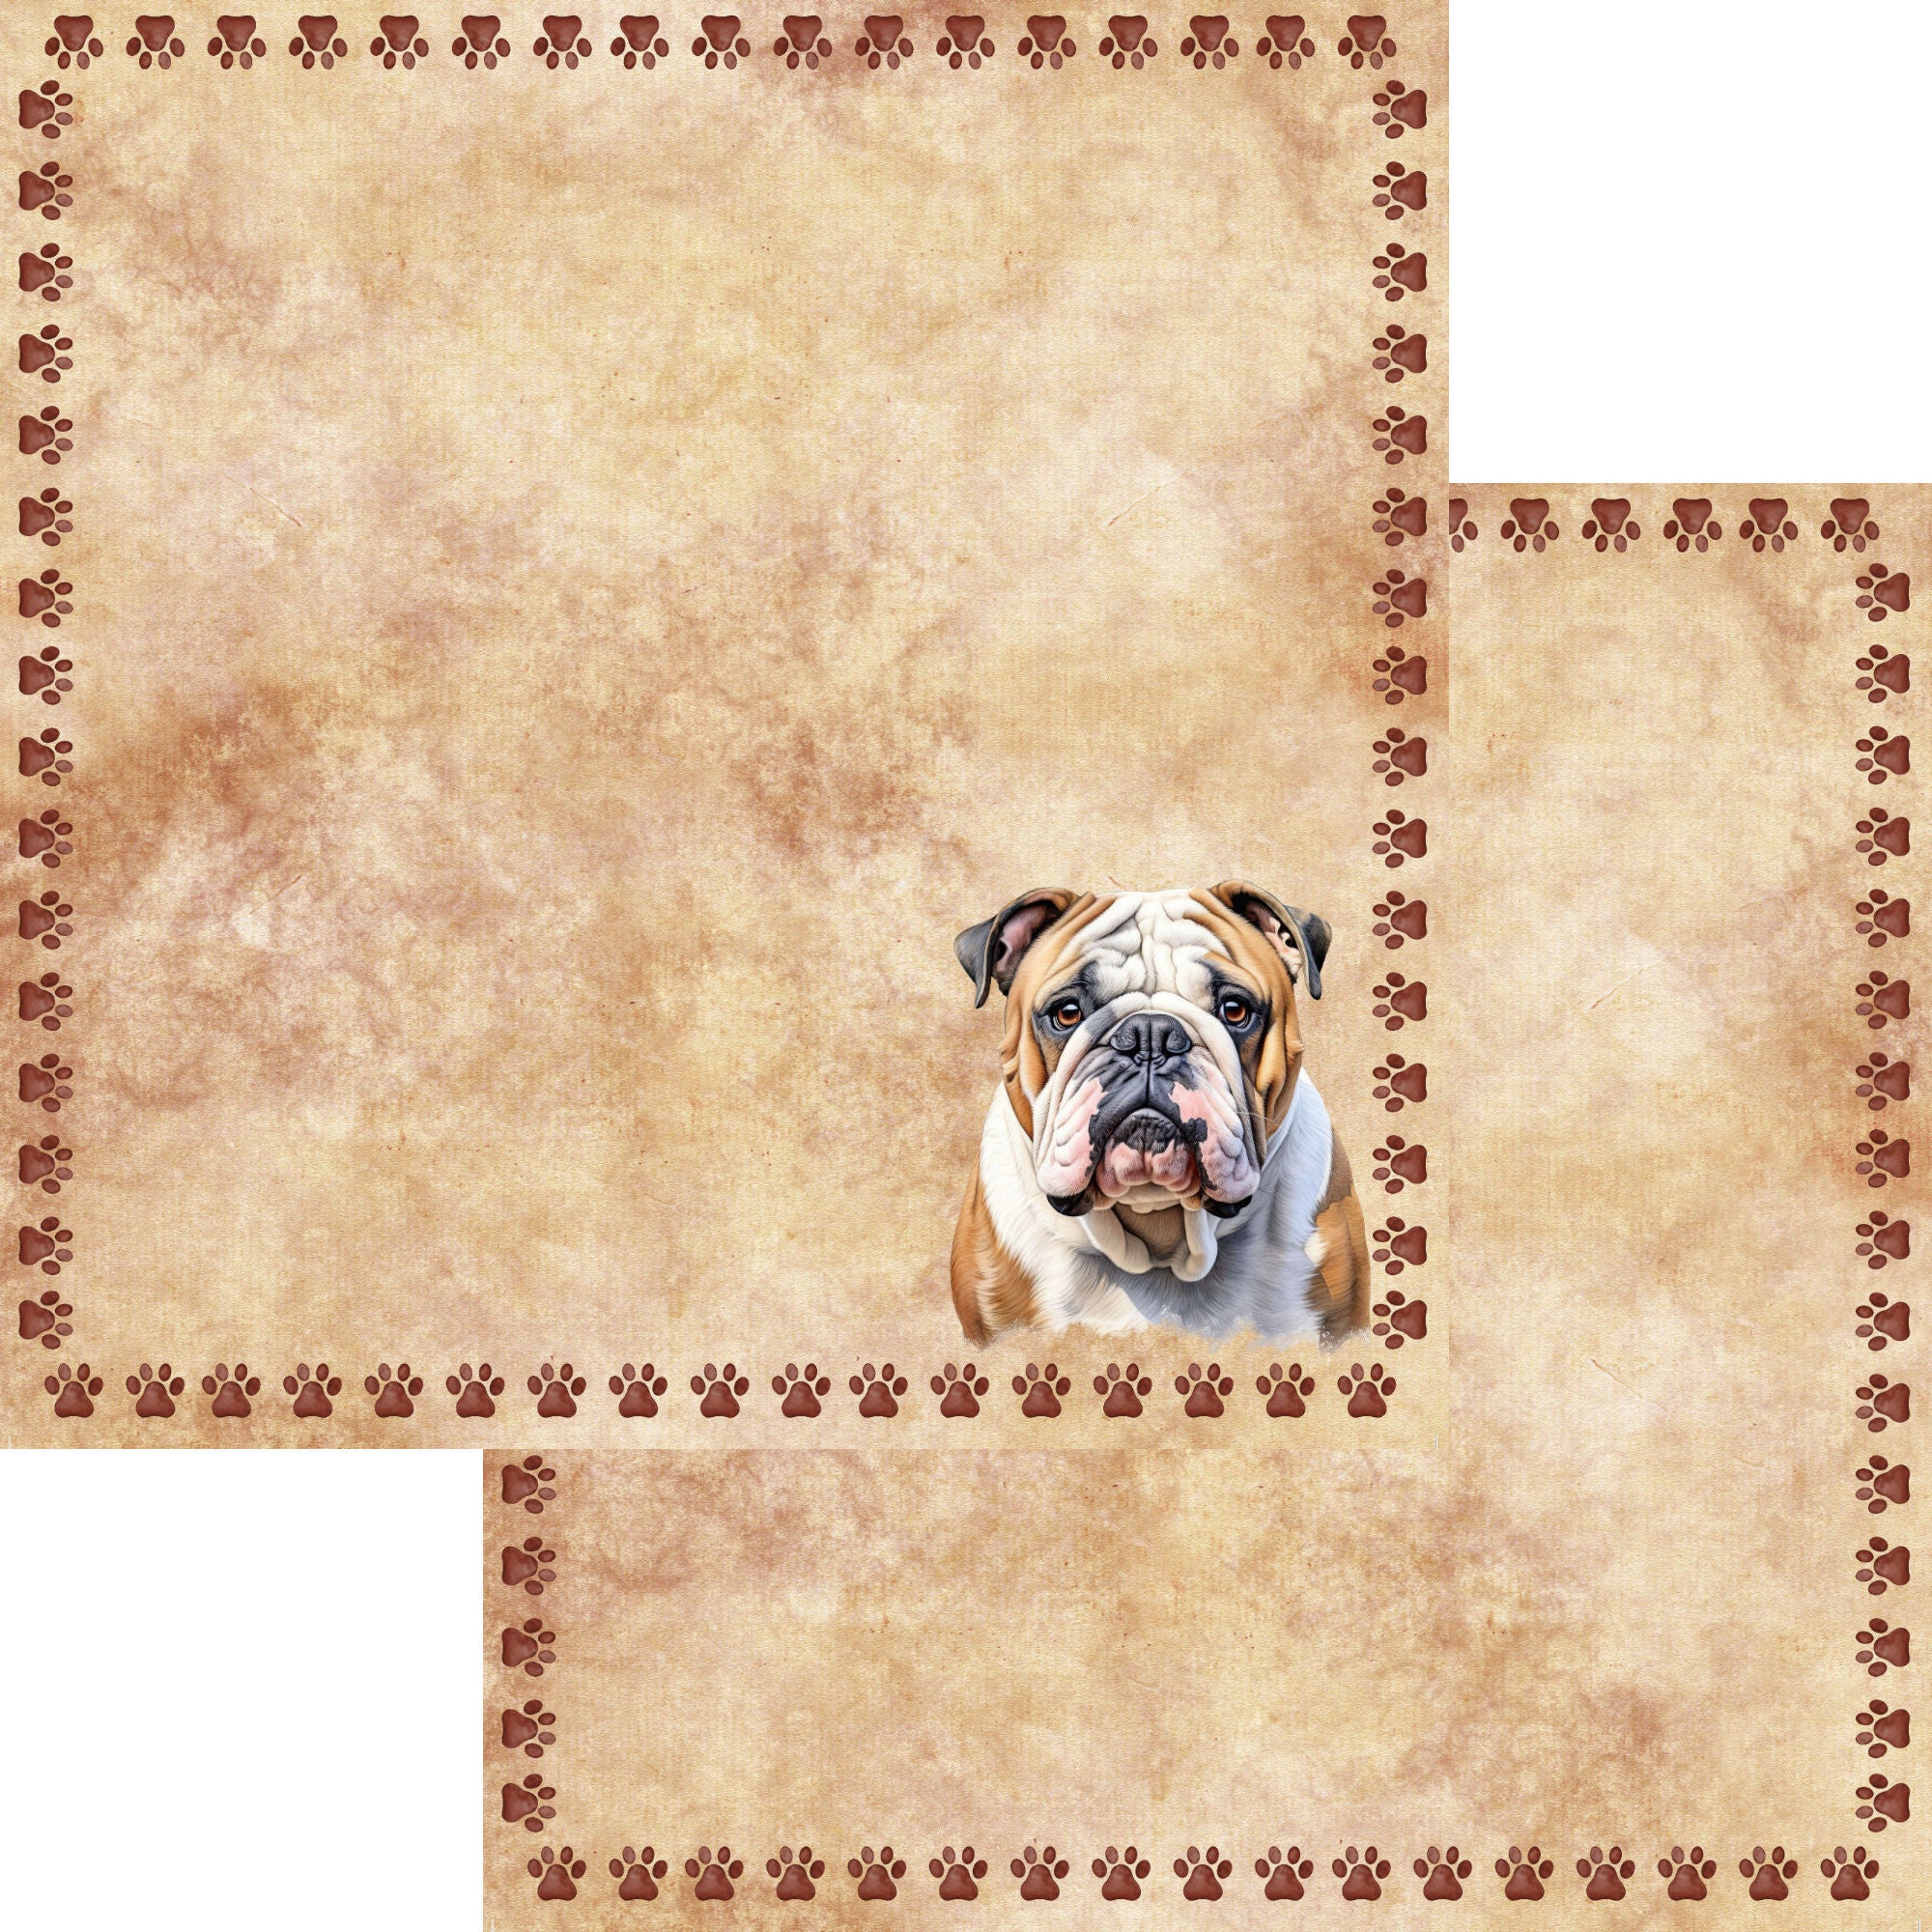 Dog Breeds Collection Bulldog 12 x 12 Double-Sided Scrapbook Paper by SSC Designs